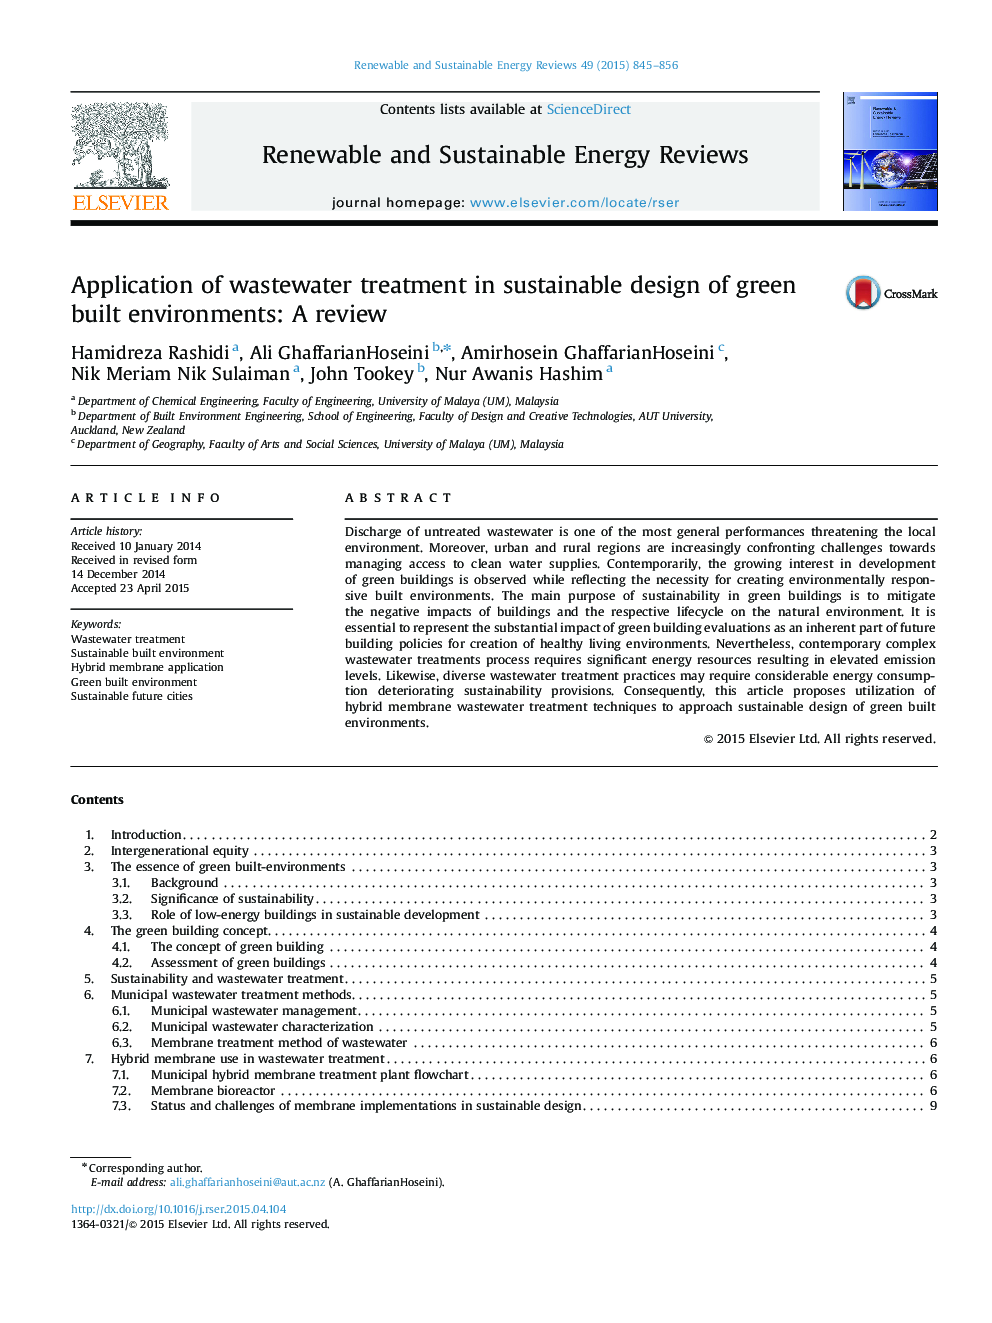 Application of wastewater treatment in sustainable design of green built environments: A review